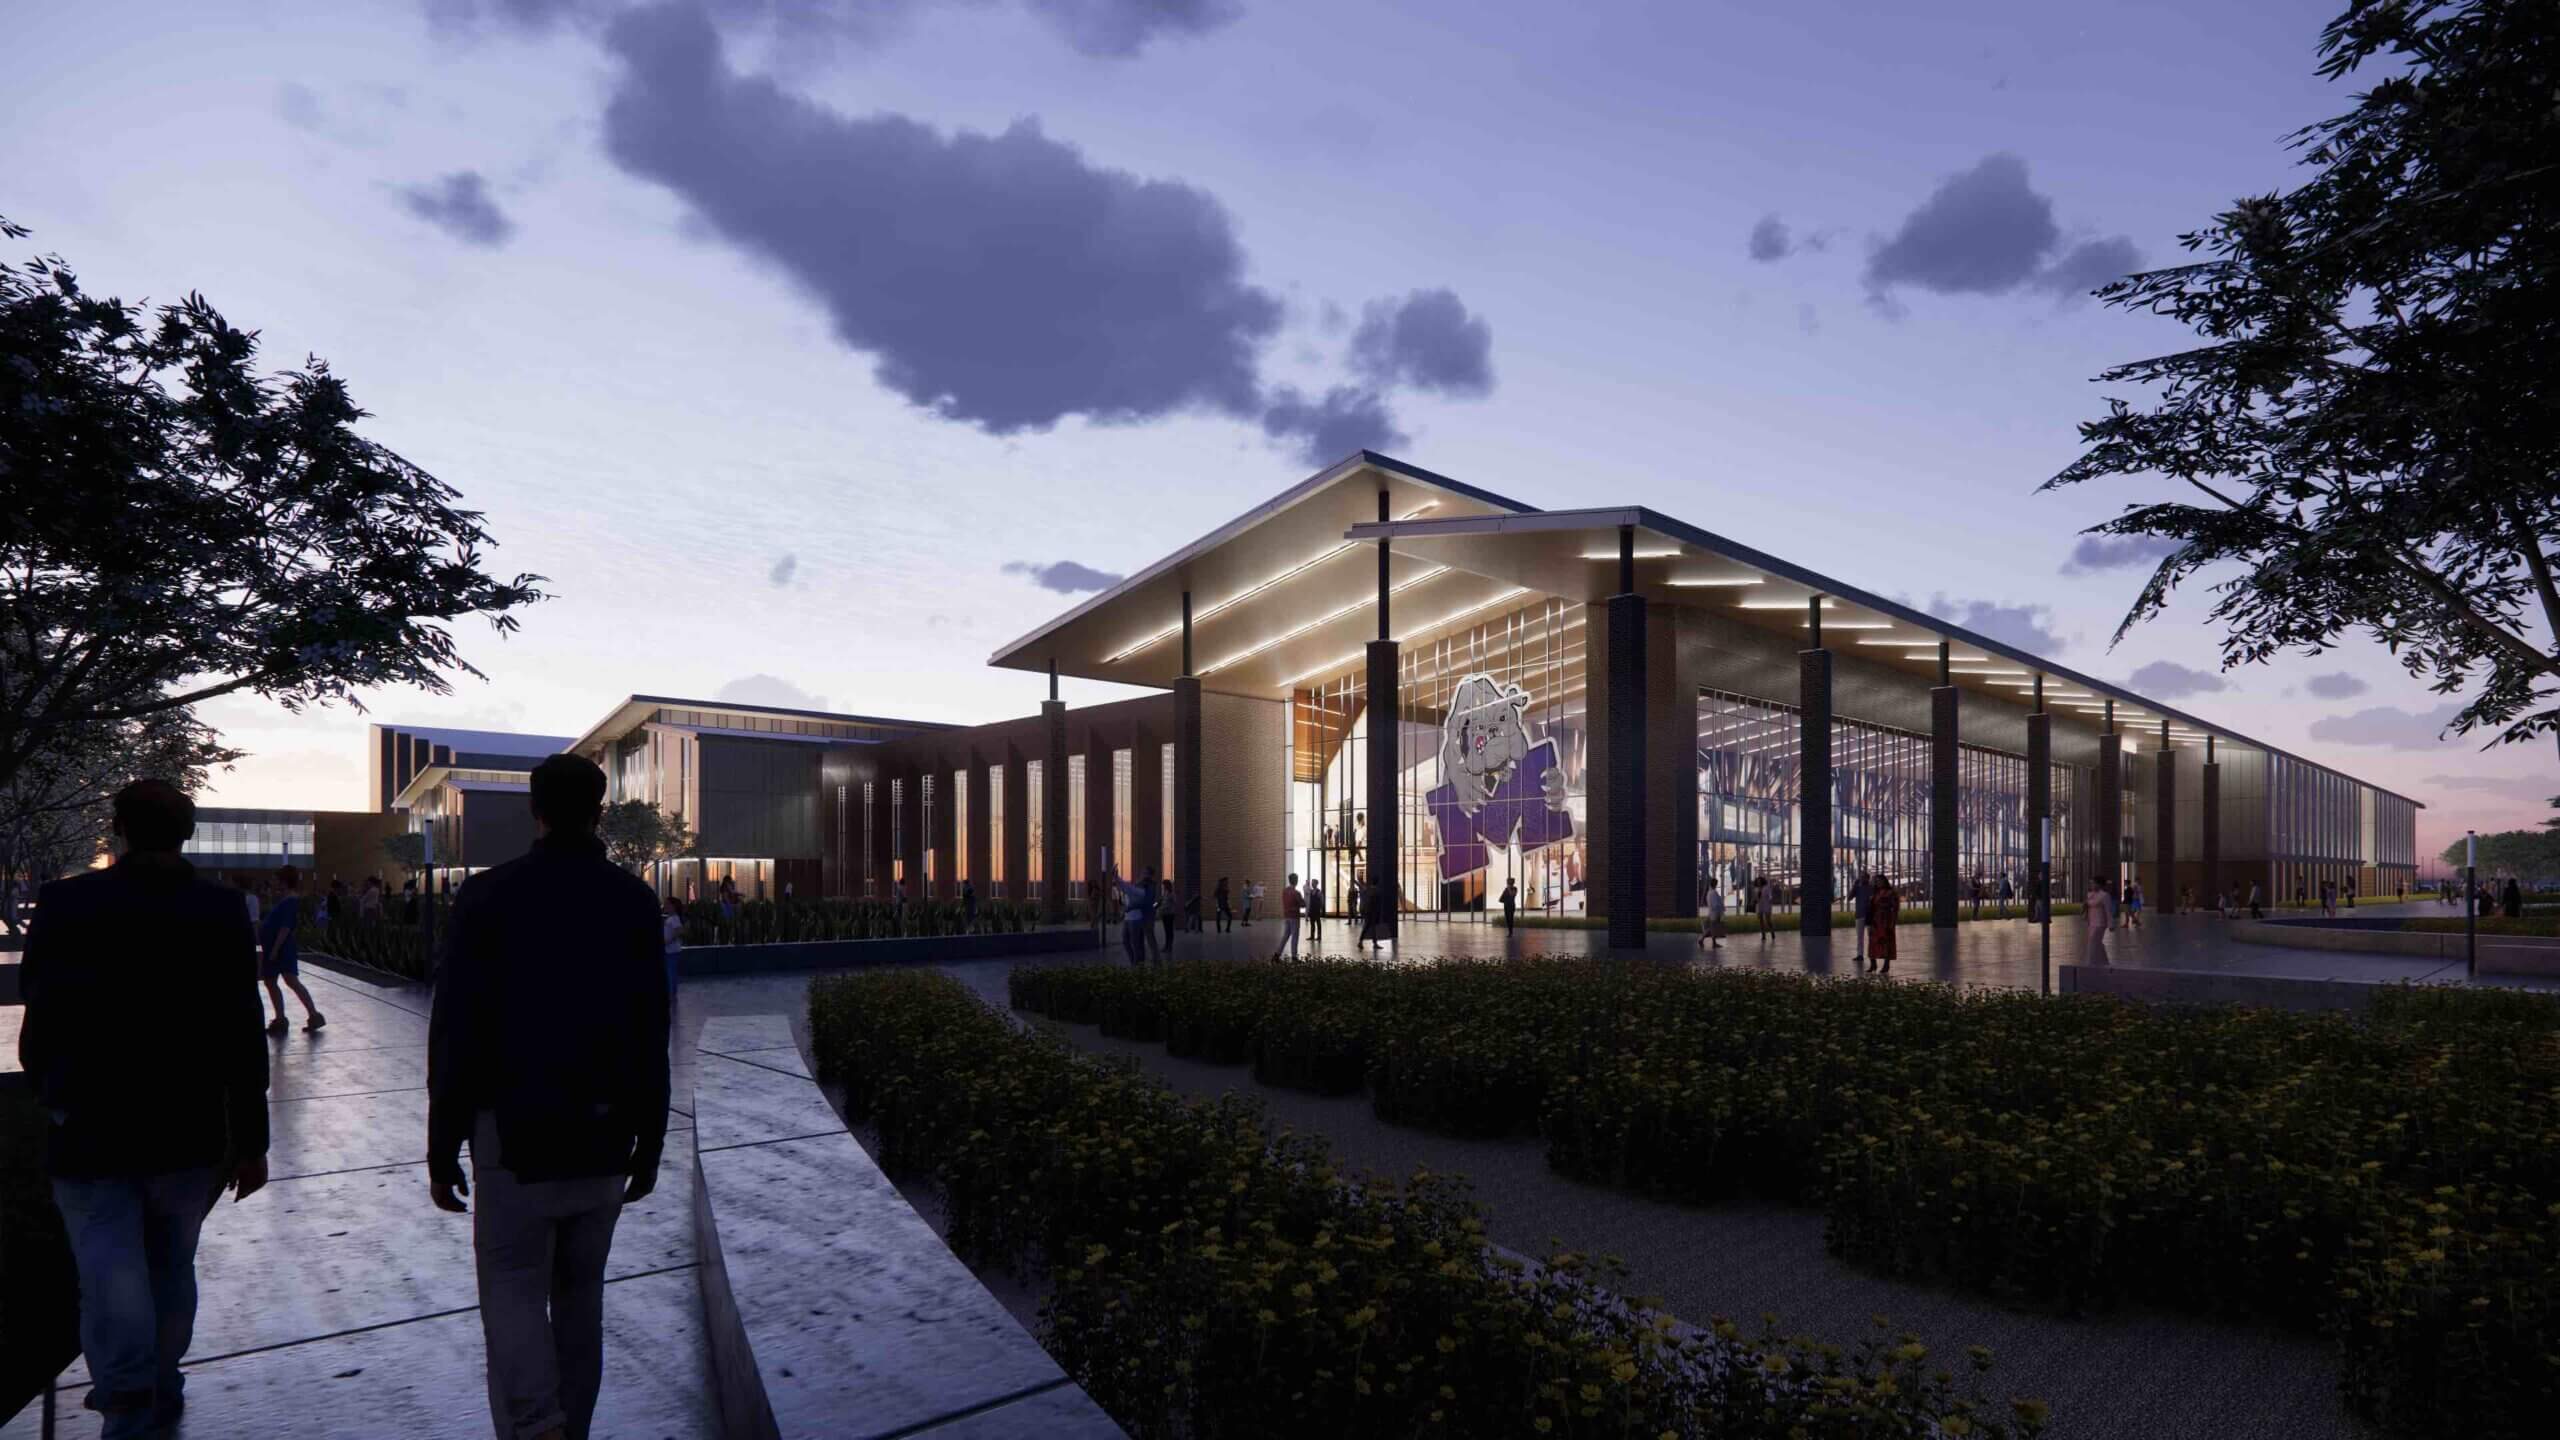 *Concept Rendering of New Midland High School, for visualization purposes only; design is subject to change